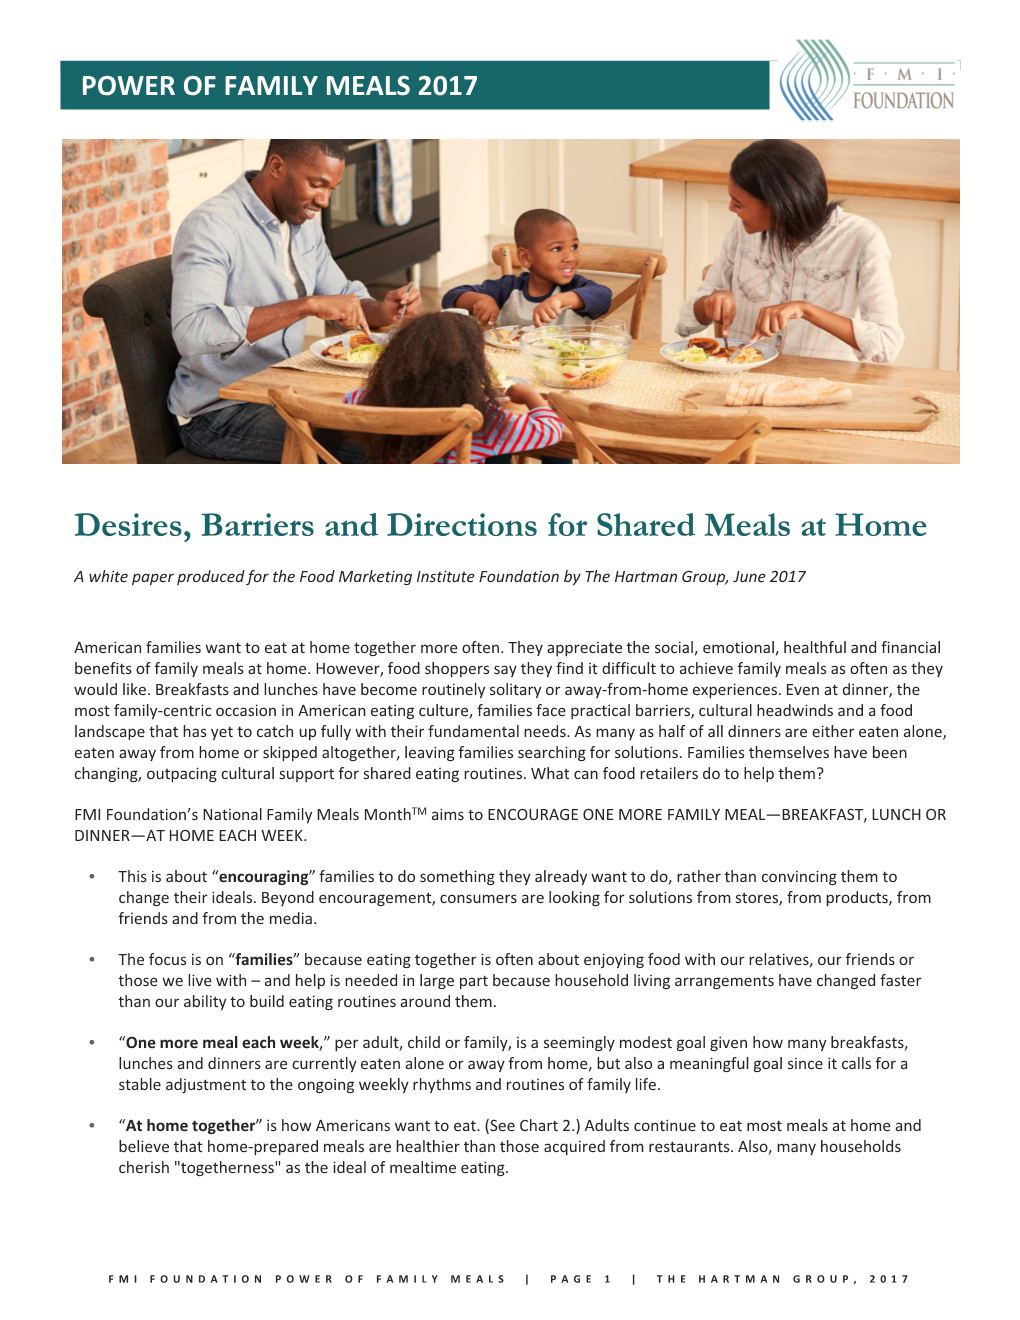 Desires, Barriers and Directions for Shared Meals at Home